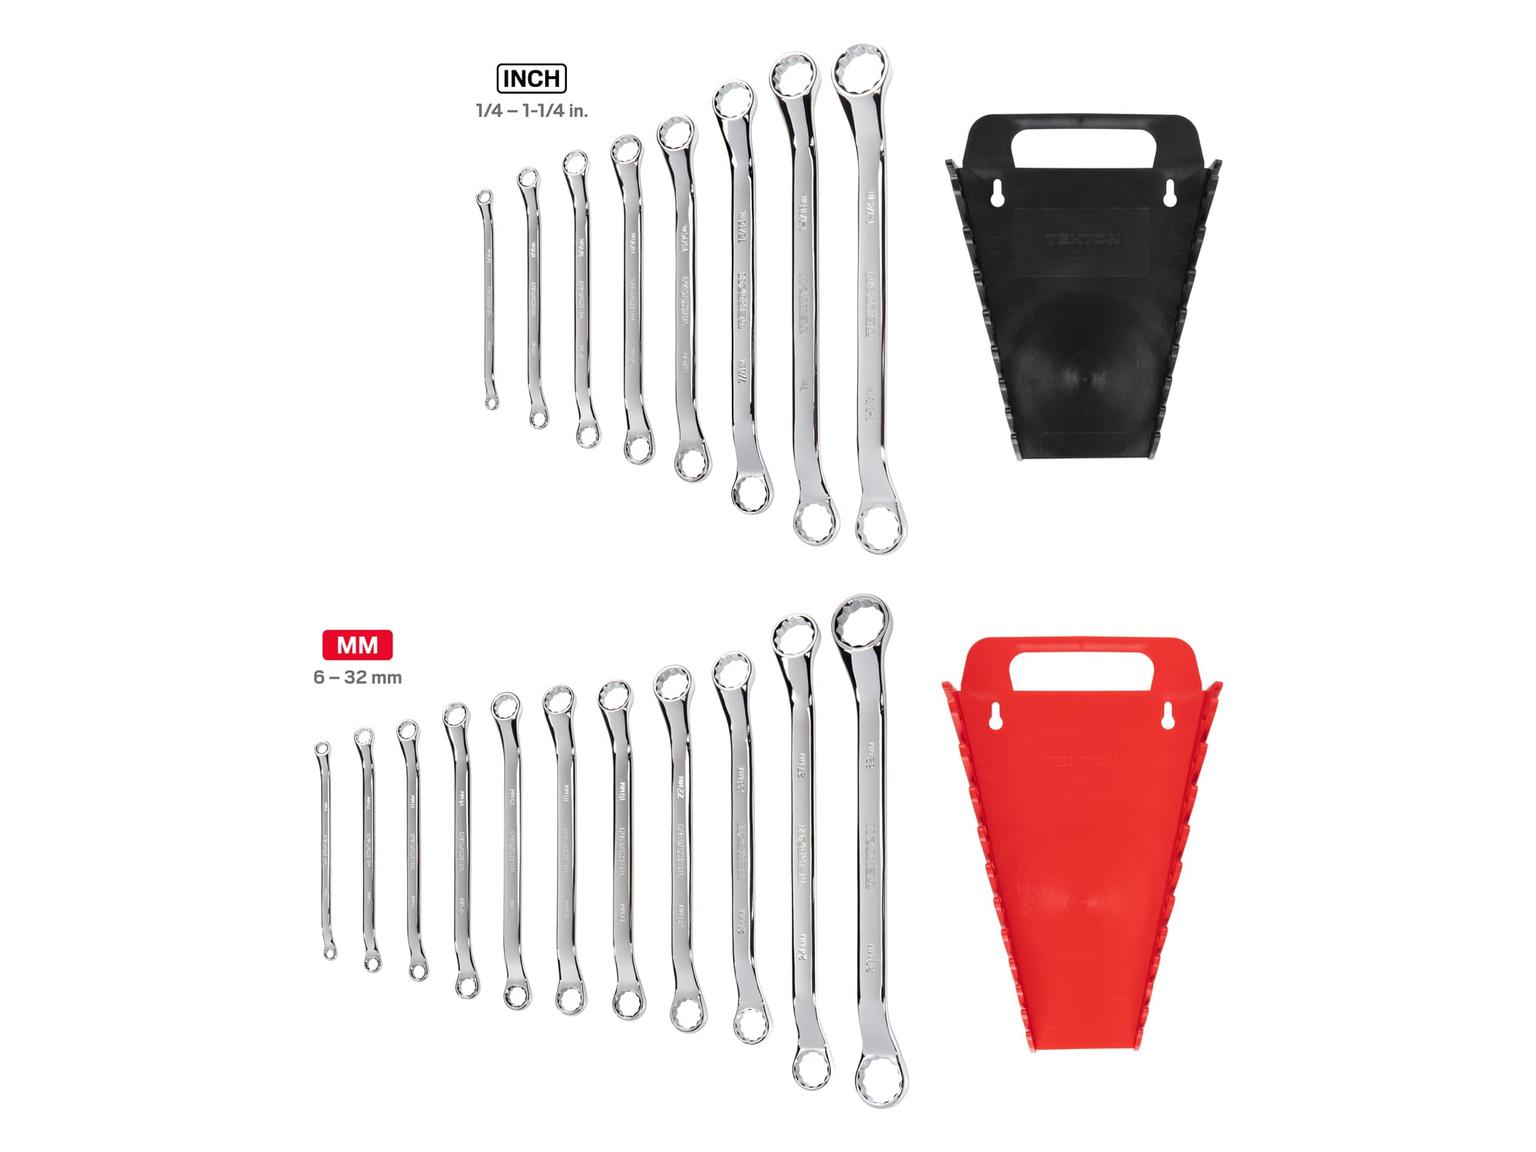 TEKTON WBE91302-T 45-Degree Offset Box End Wrench Set with Holder, 19-Piece (1/4-1-1/4 in., 6-32 mm)